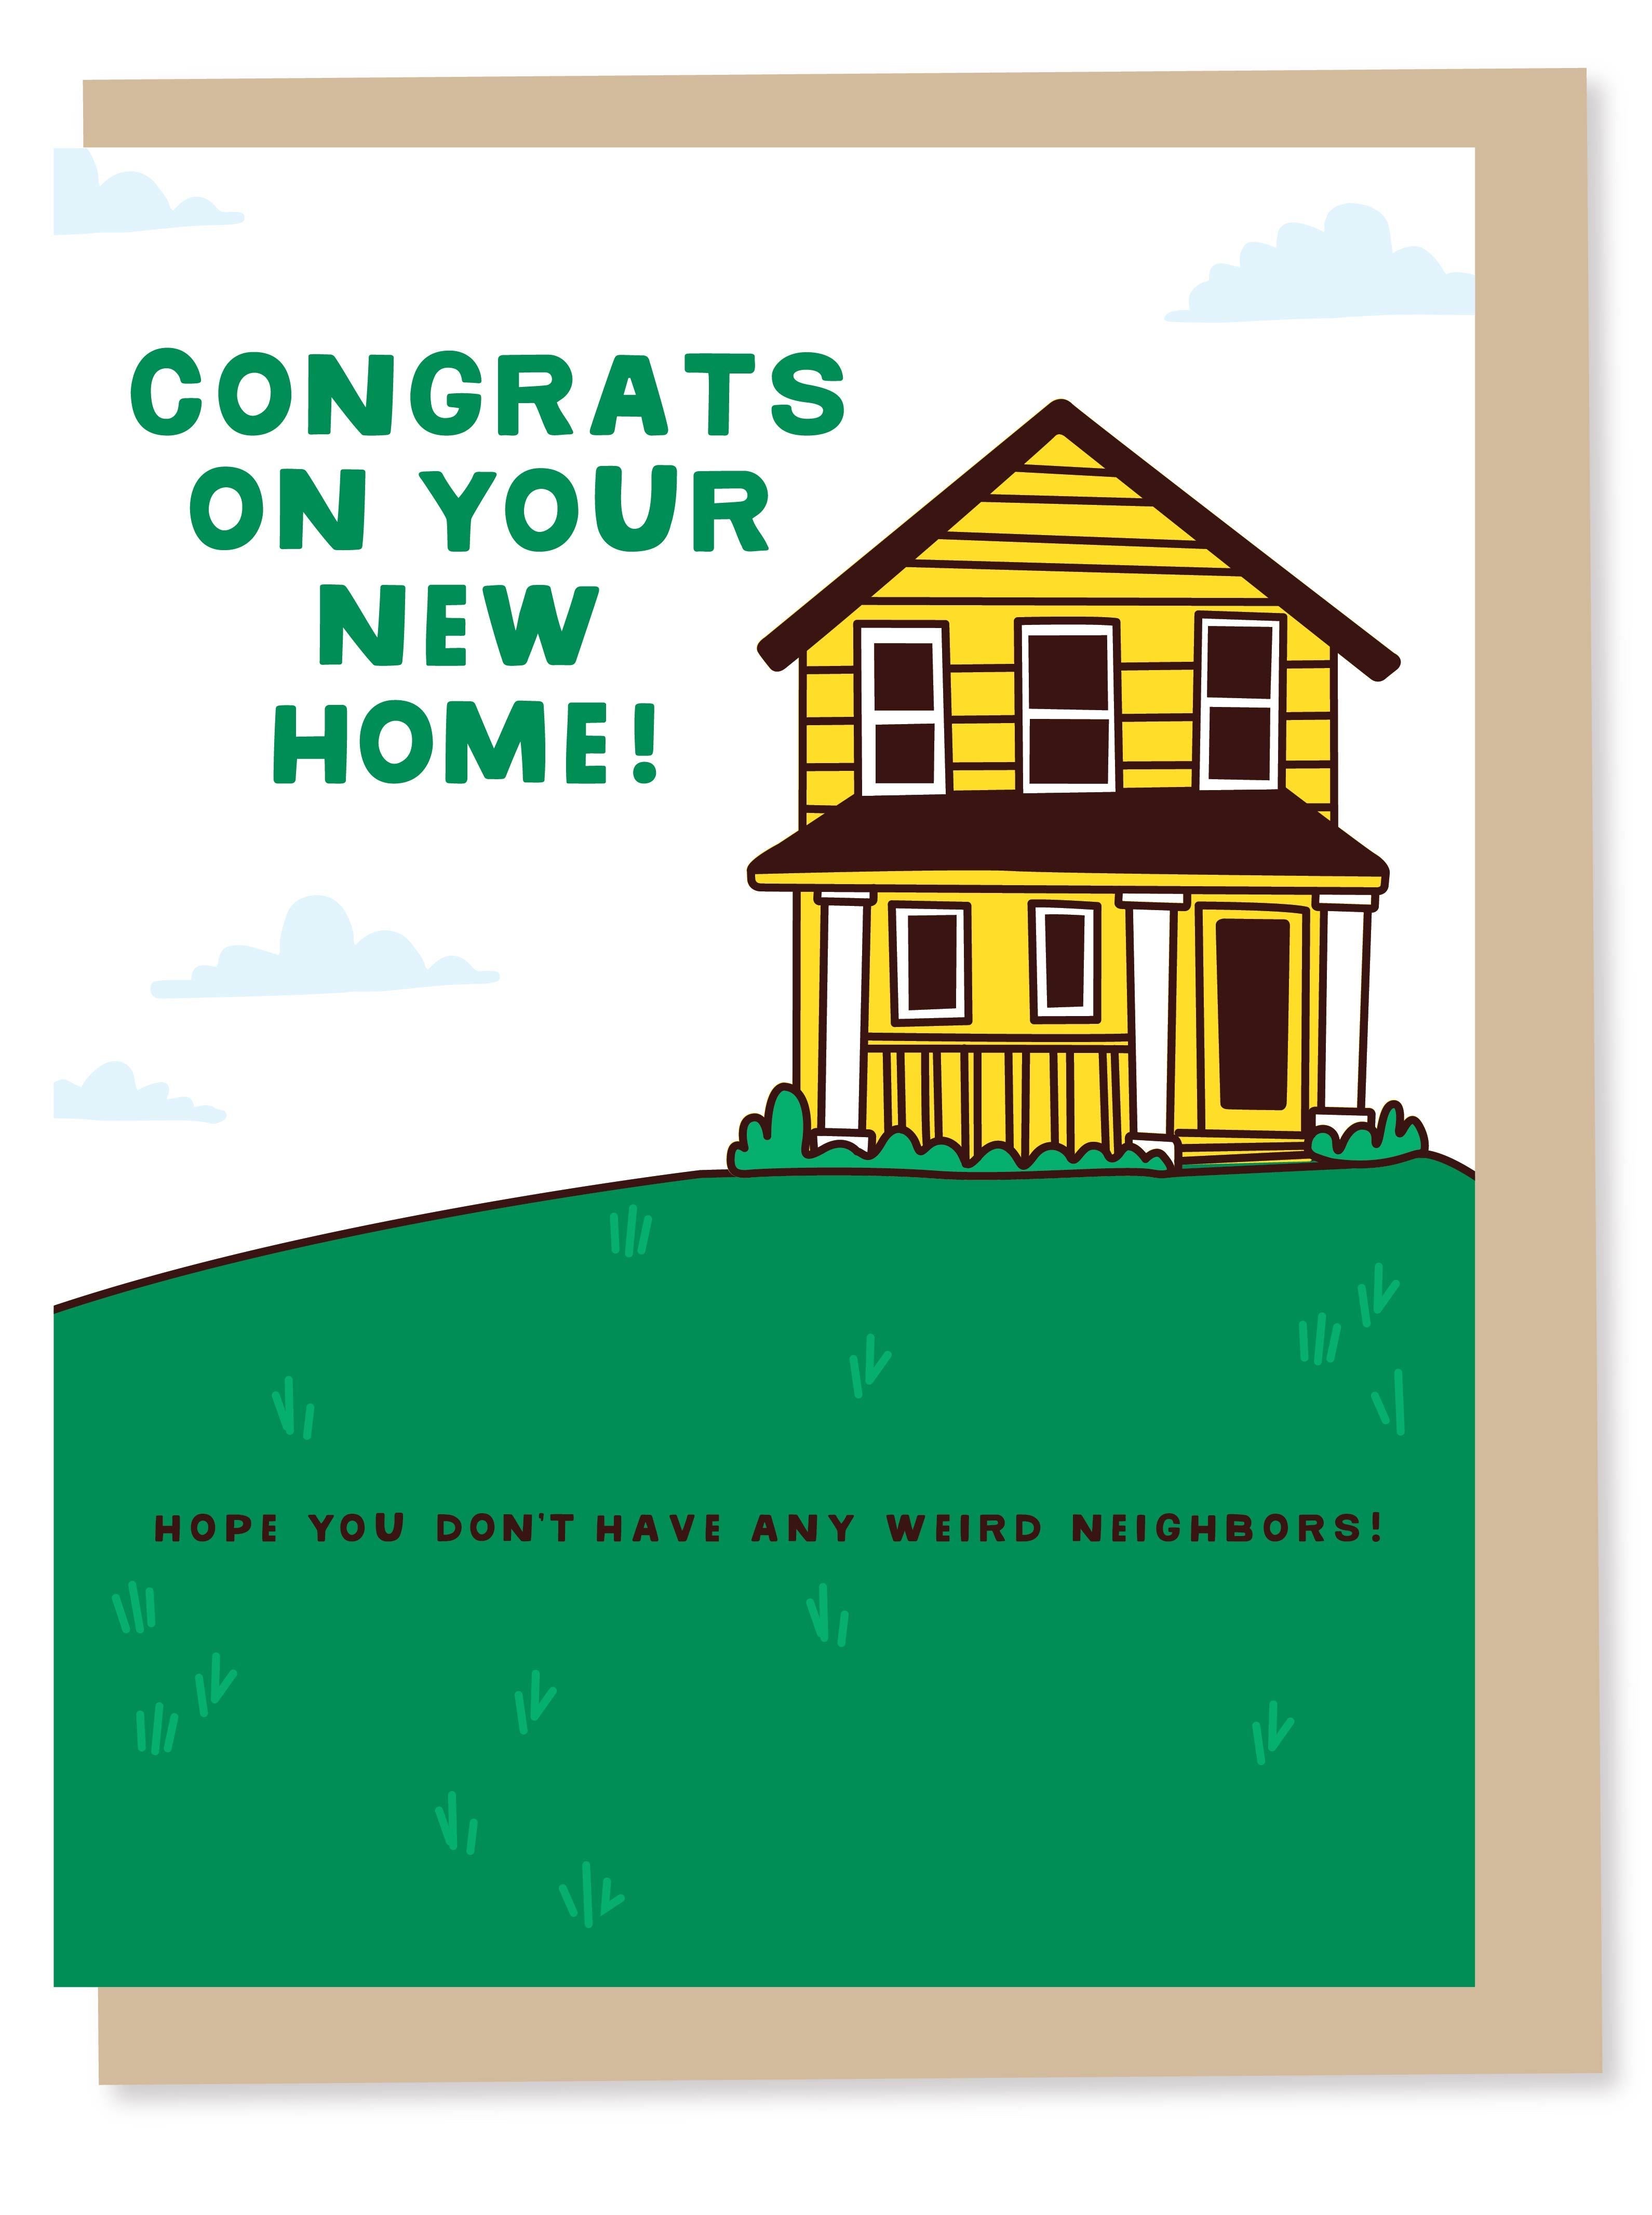 Congrats on your new home greeting card